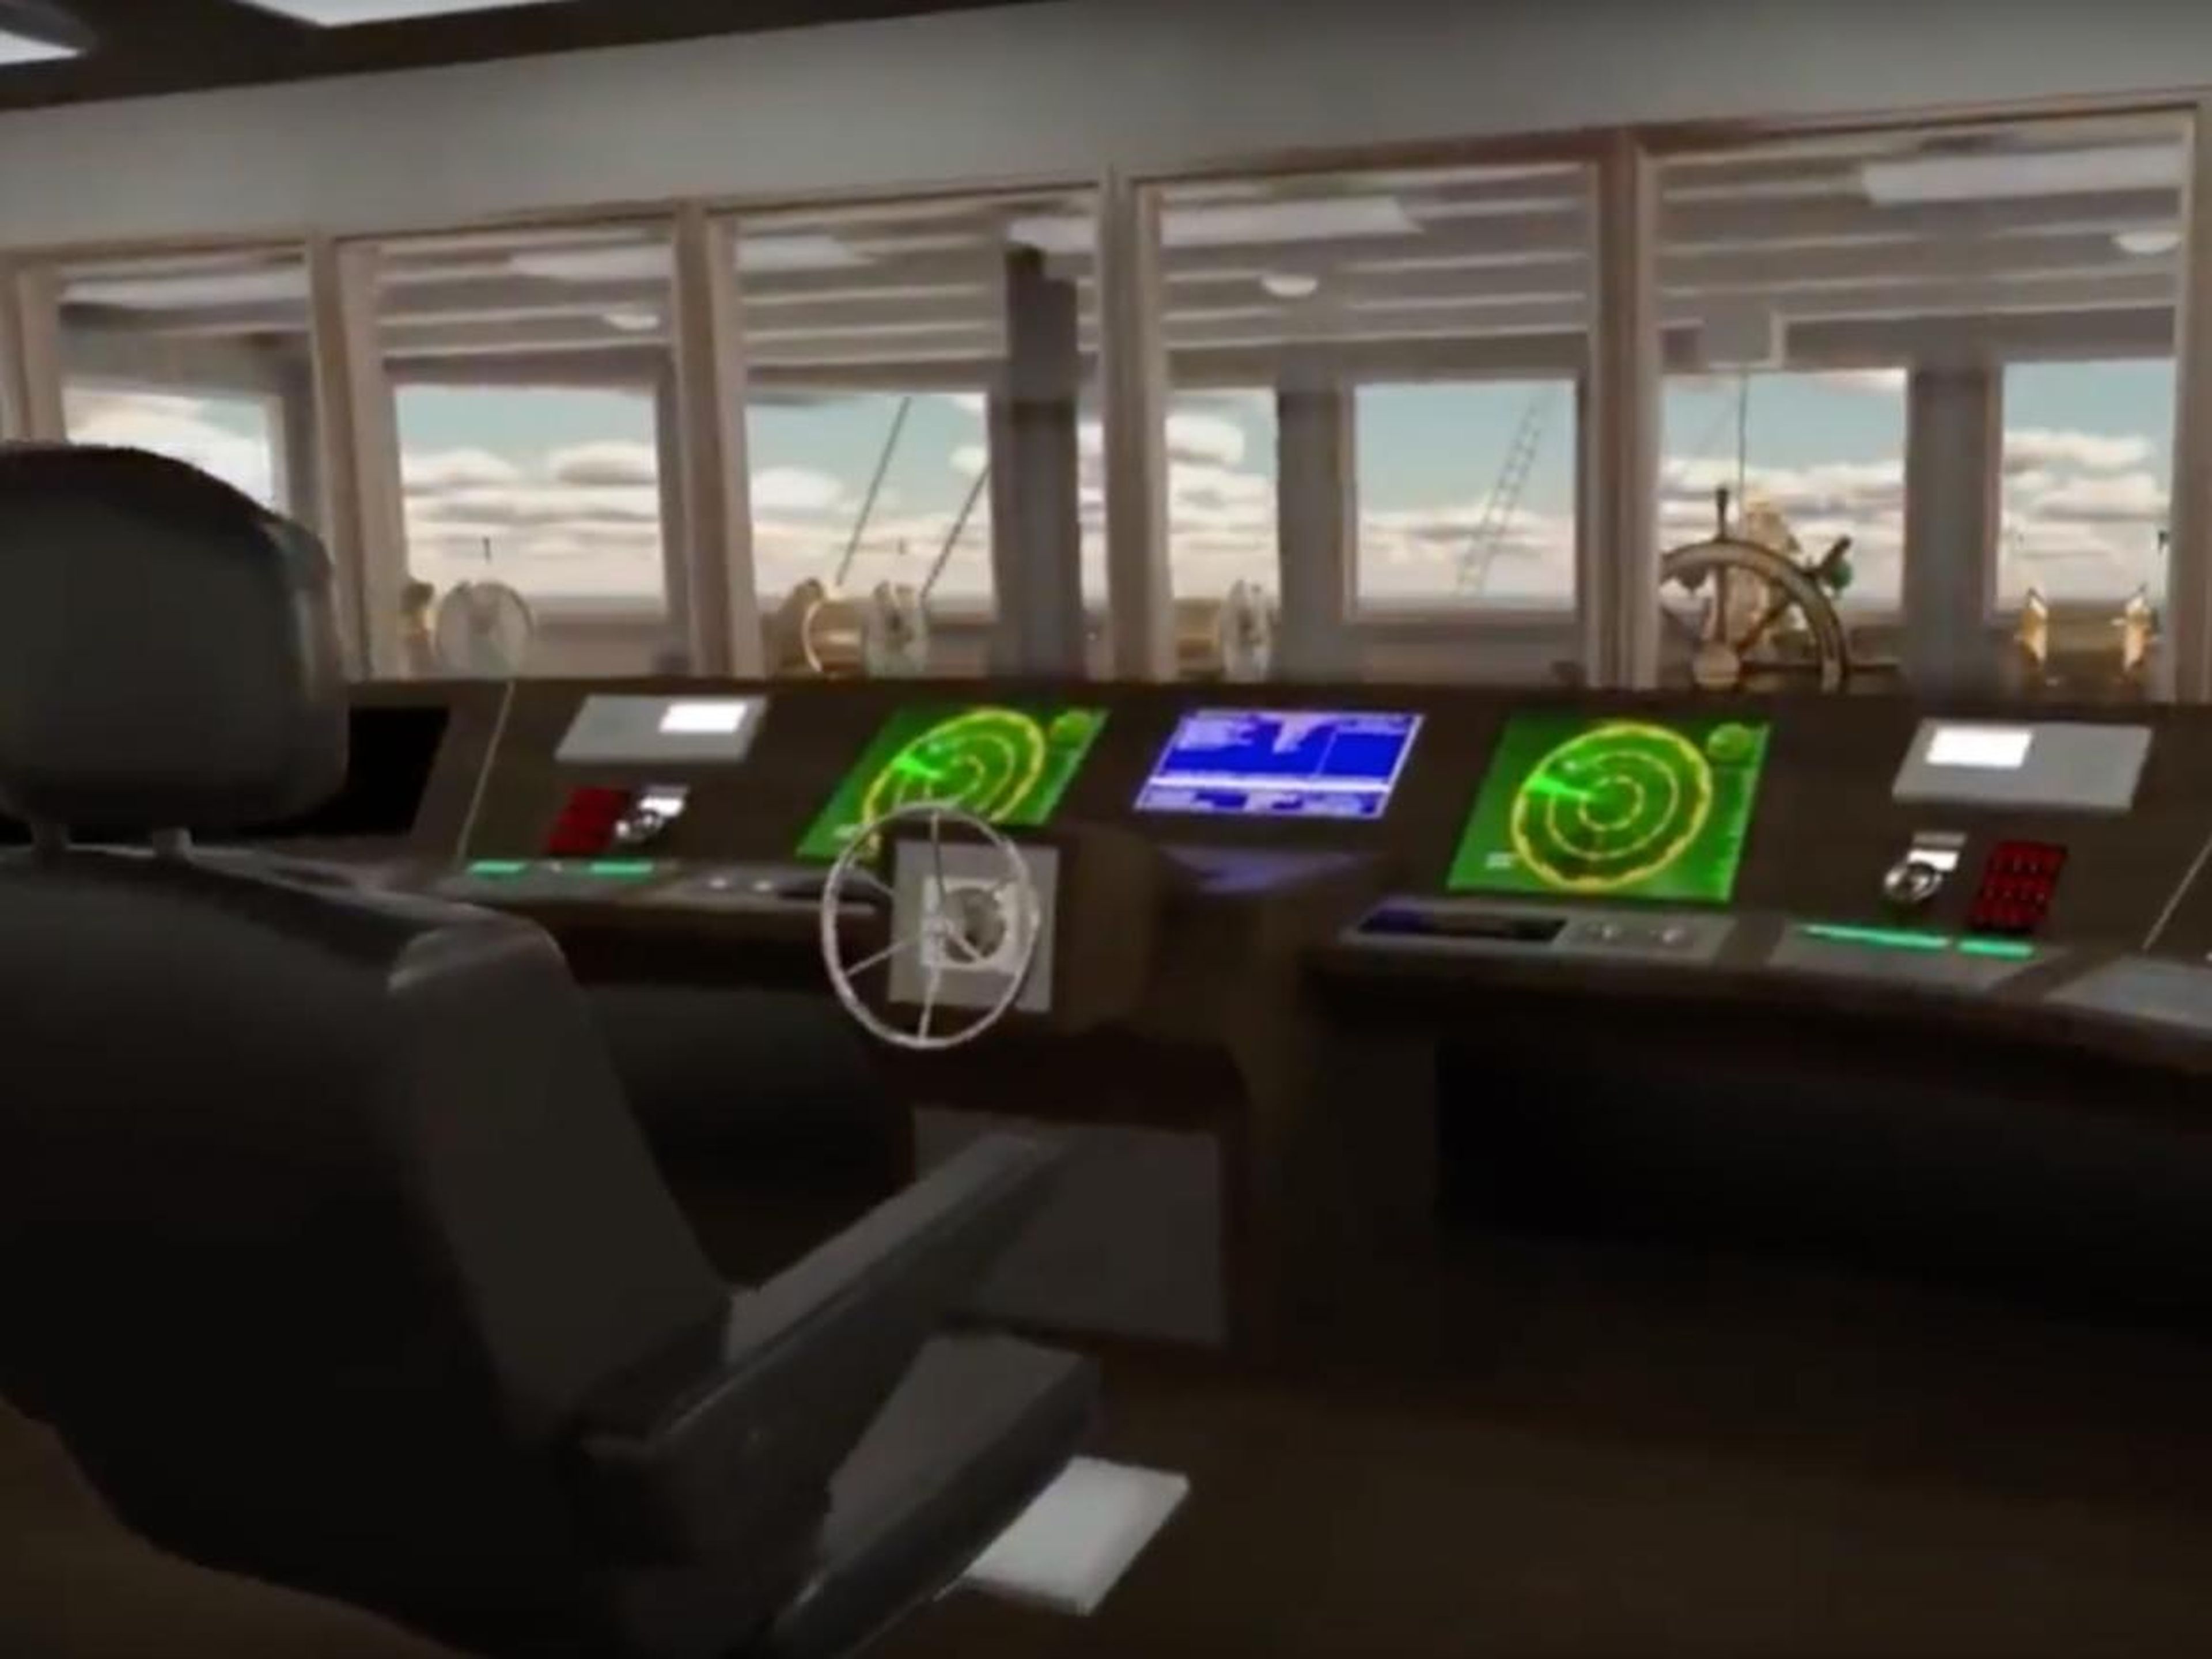 ... except this time around, modern 21st century technology like radar will be used to navigate the seas.